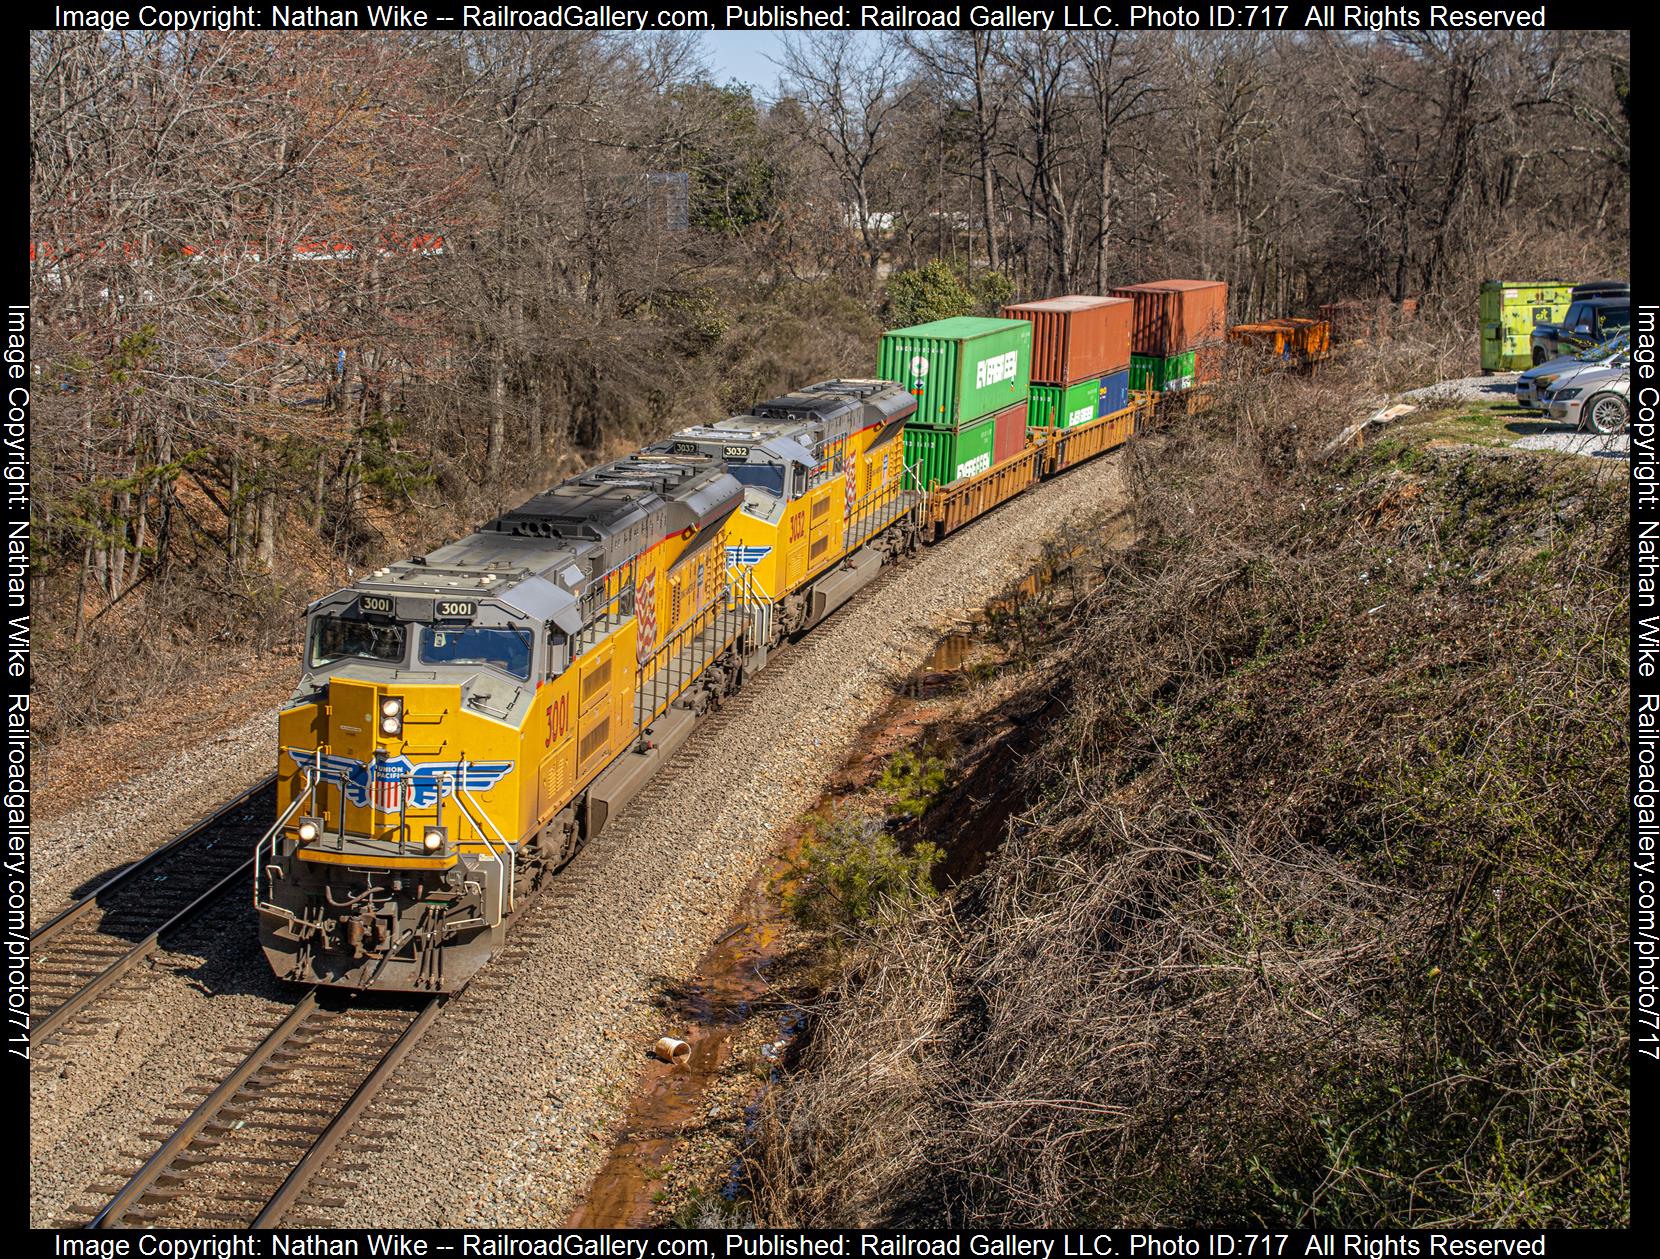 UP 3001 is a class ST70AH and  is pictured in Lyman, South Carolina , United States.  This was taken along the Piedmont Divison  on the Union Pacific Railroad. Photo Copyright: Nathan Wike uploaded to Railroad Gallery on 02/20/2023. This photograph of UP 3001 was taken on Saturday, February 18, 2023. All Rights Reserved. 